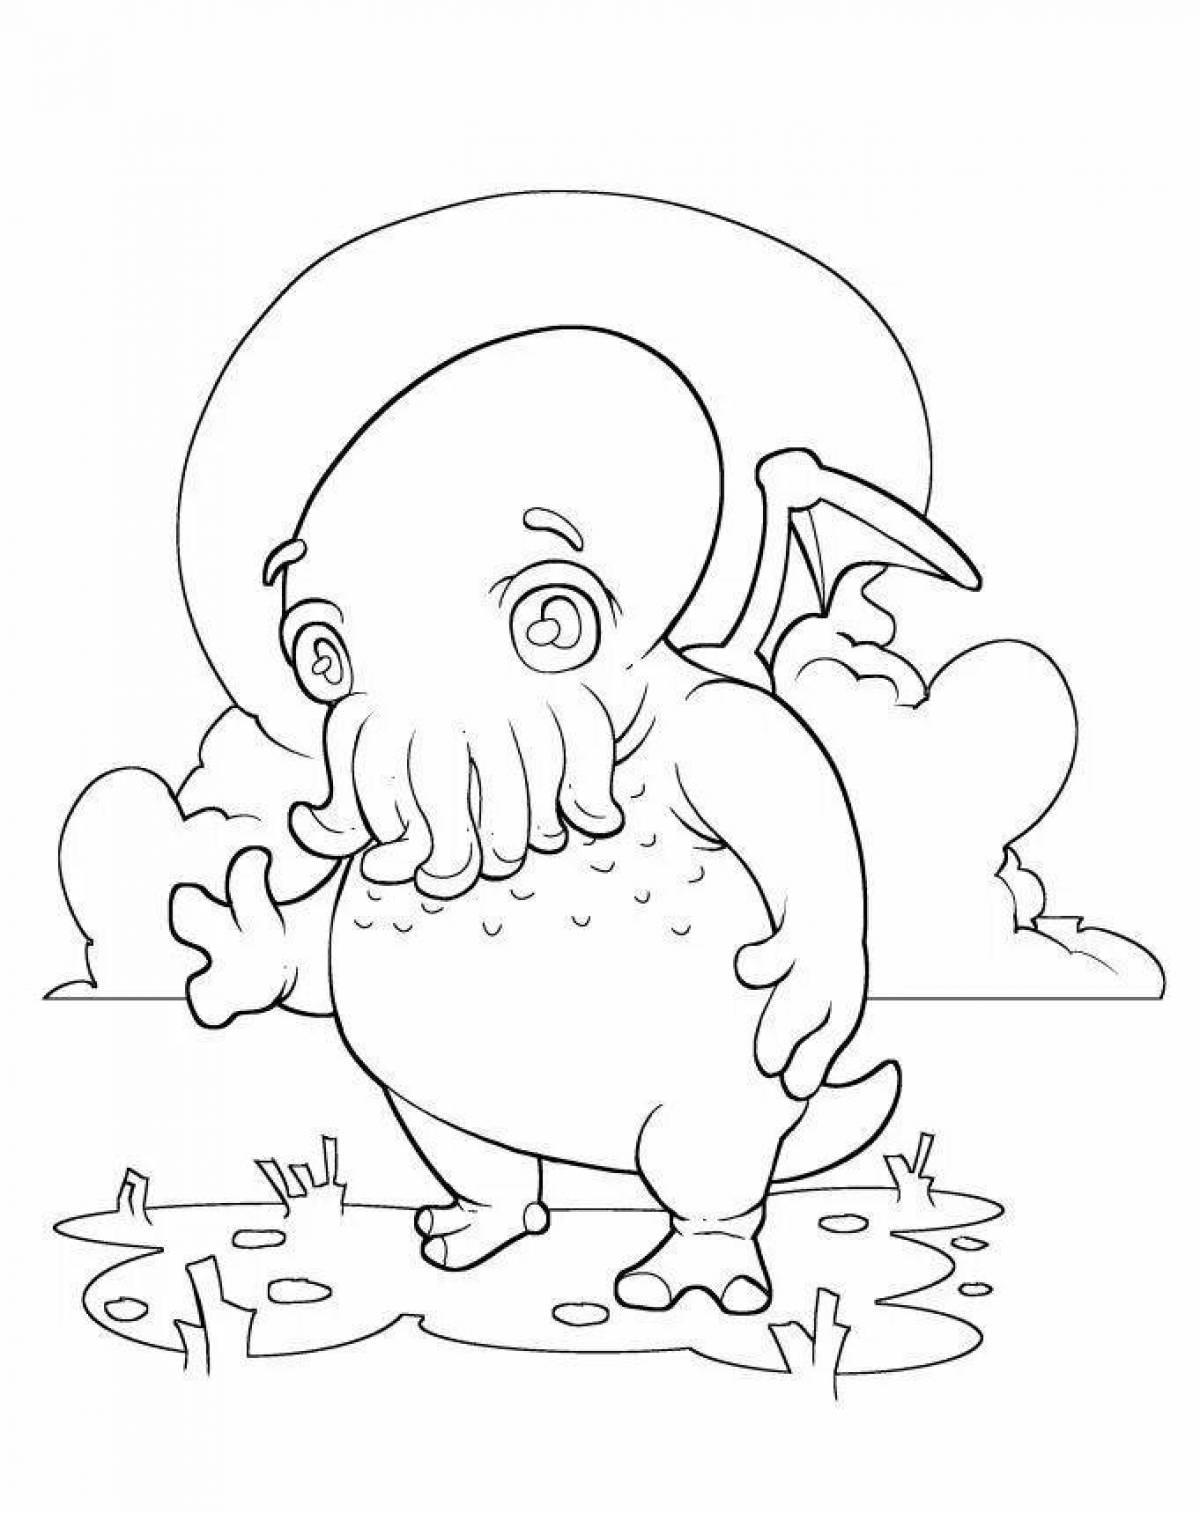 Luxury cthulhu coloring book